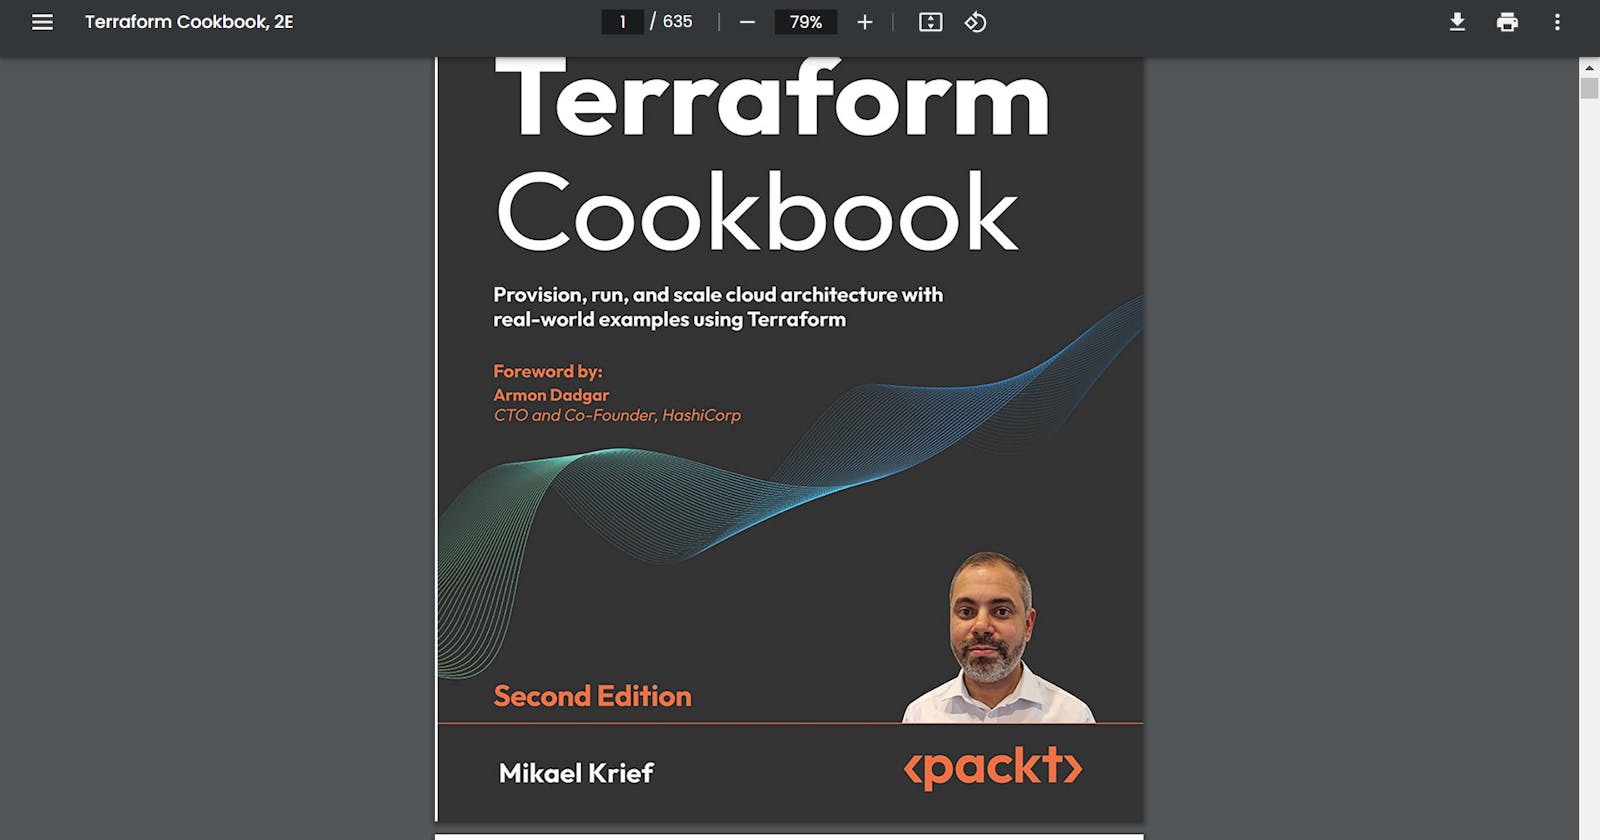 A Review of "Terraform Cookbook Second Edition" by Mikael Krief